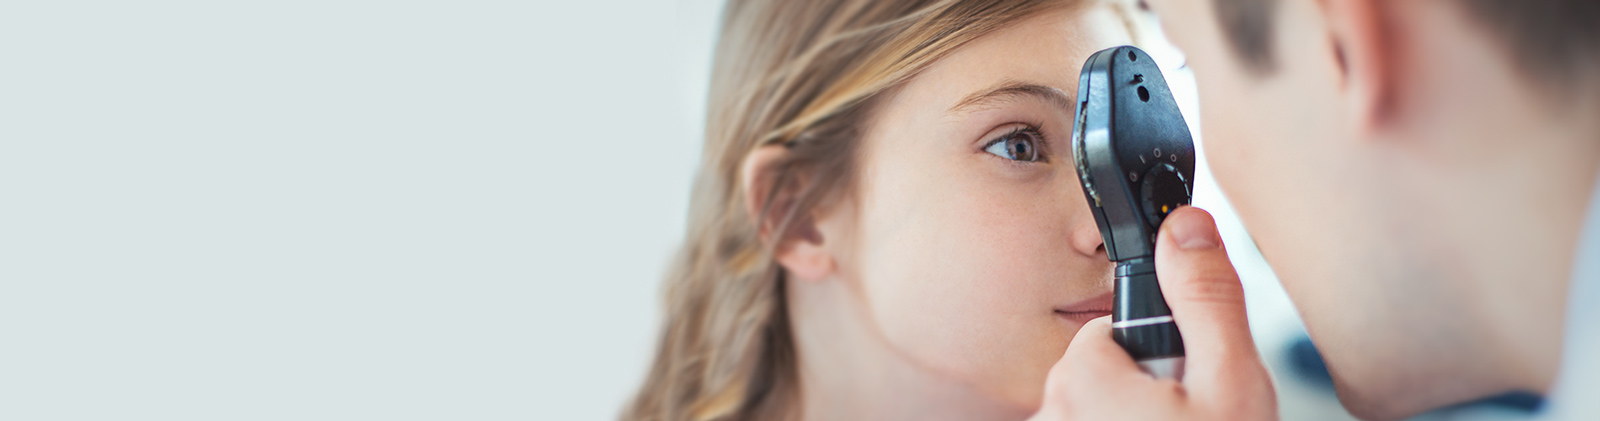 7 Signs Your Child Needs a Vision Checkup